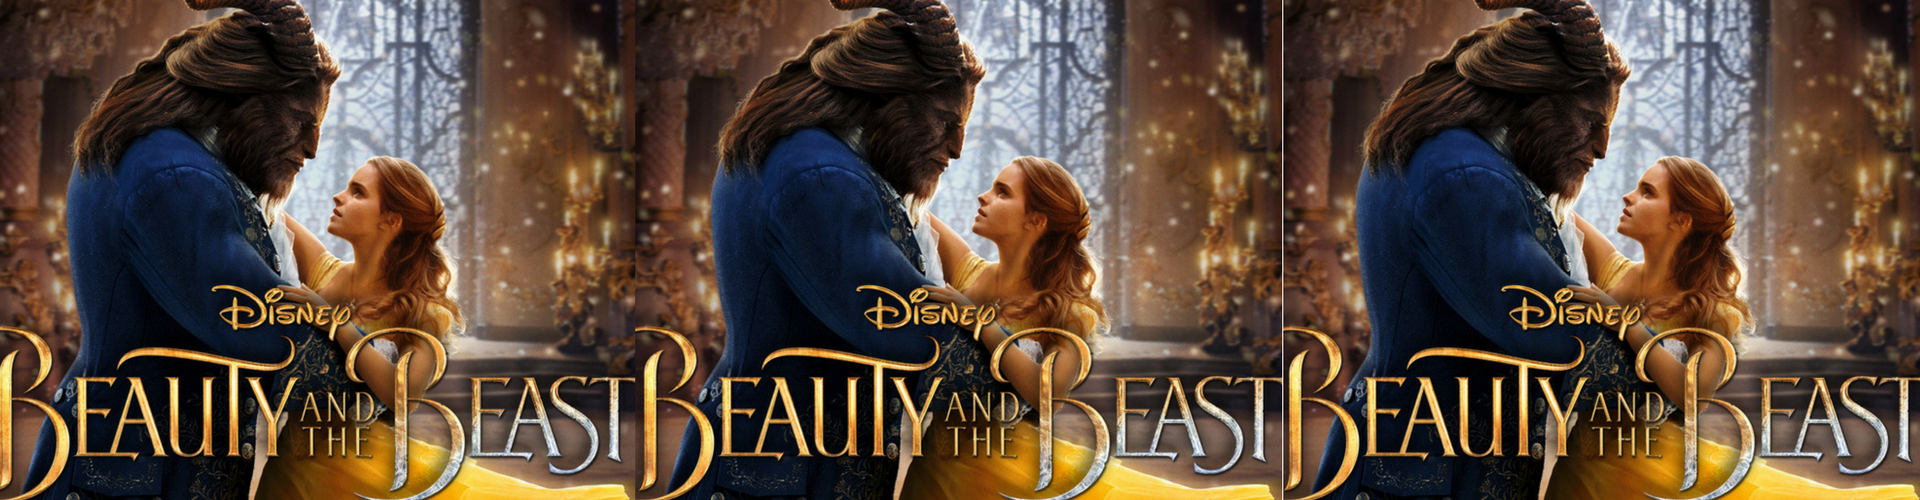 Belle is a feminist, too. {PLUS WIN TICKETS TO A VIP BEAUTY AND THE BEAST PRE-SCREENING!}